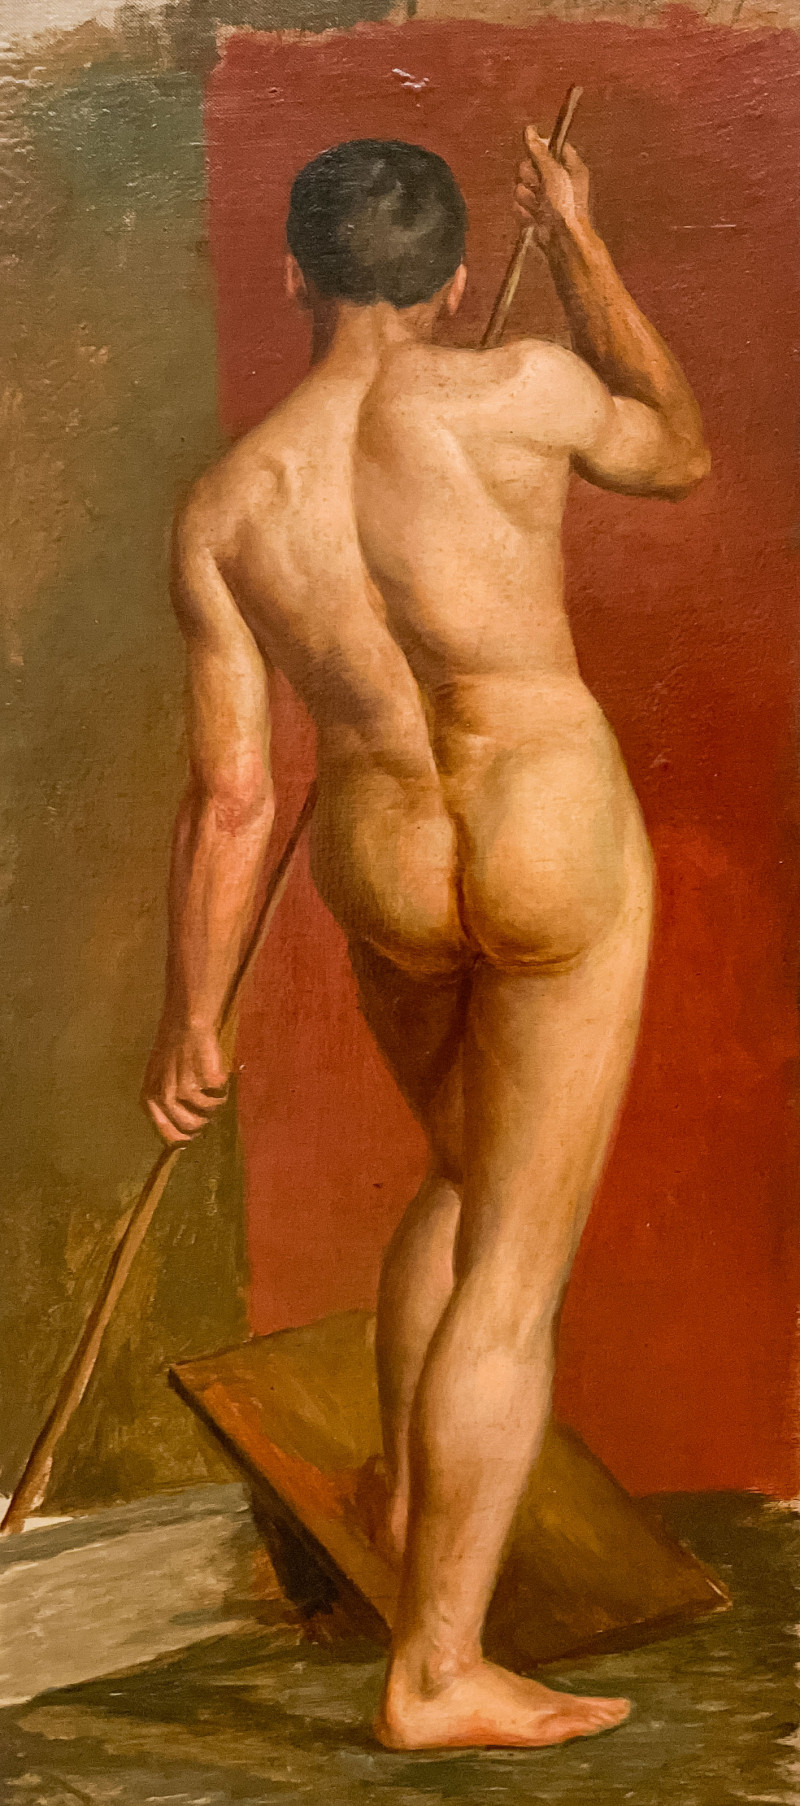 Artist Unknown - Male Nude Study